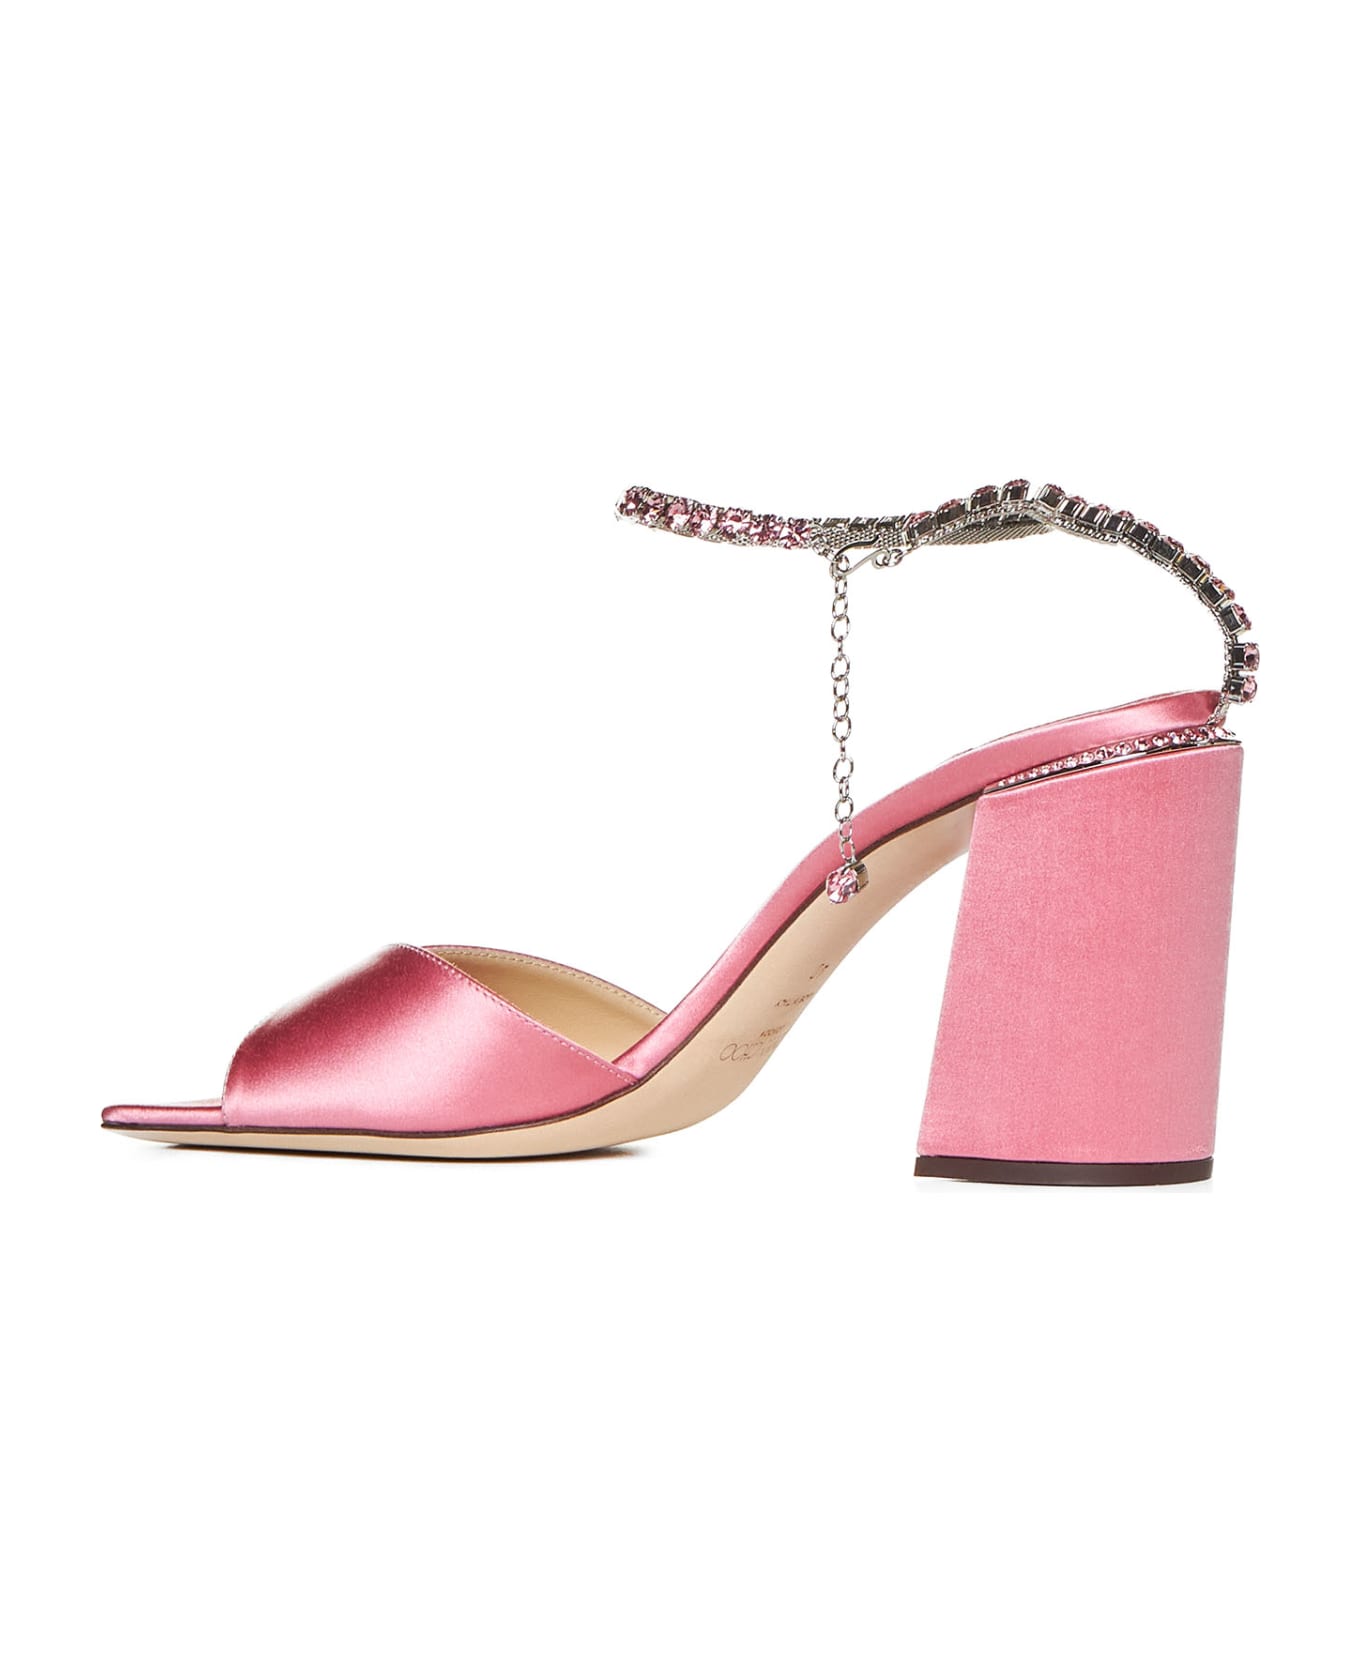 Jimmy Choo Sandals - Candy pink/candy pink サンダル